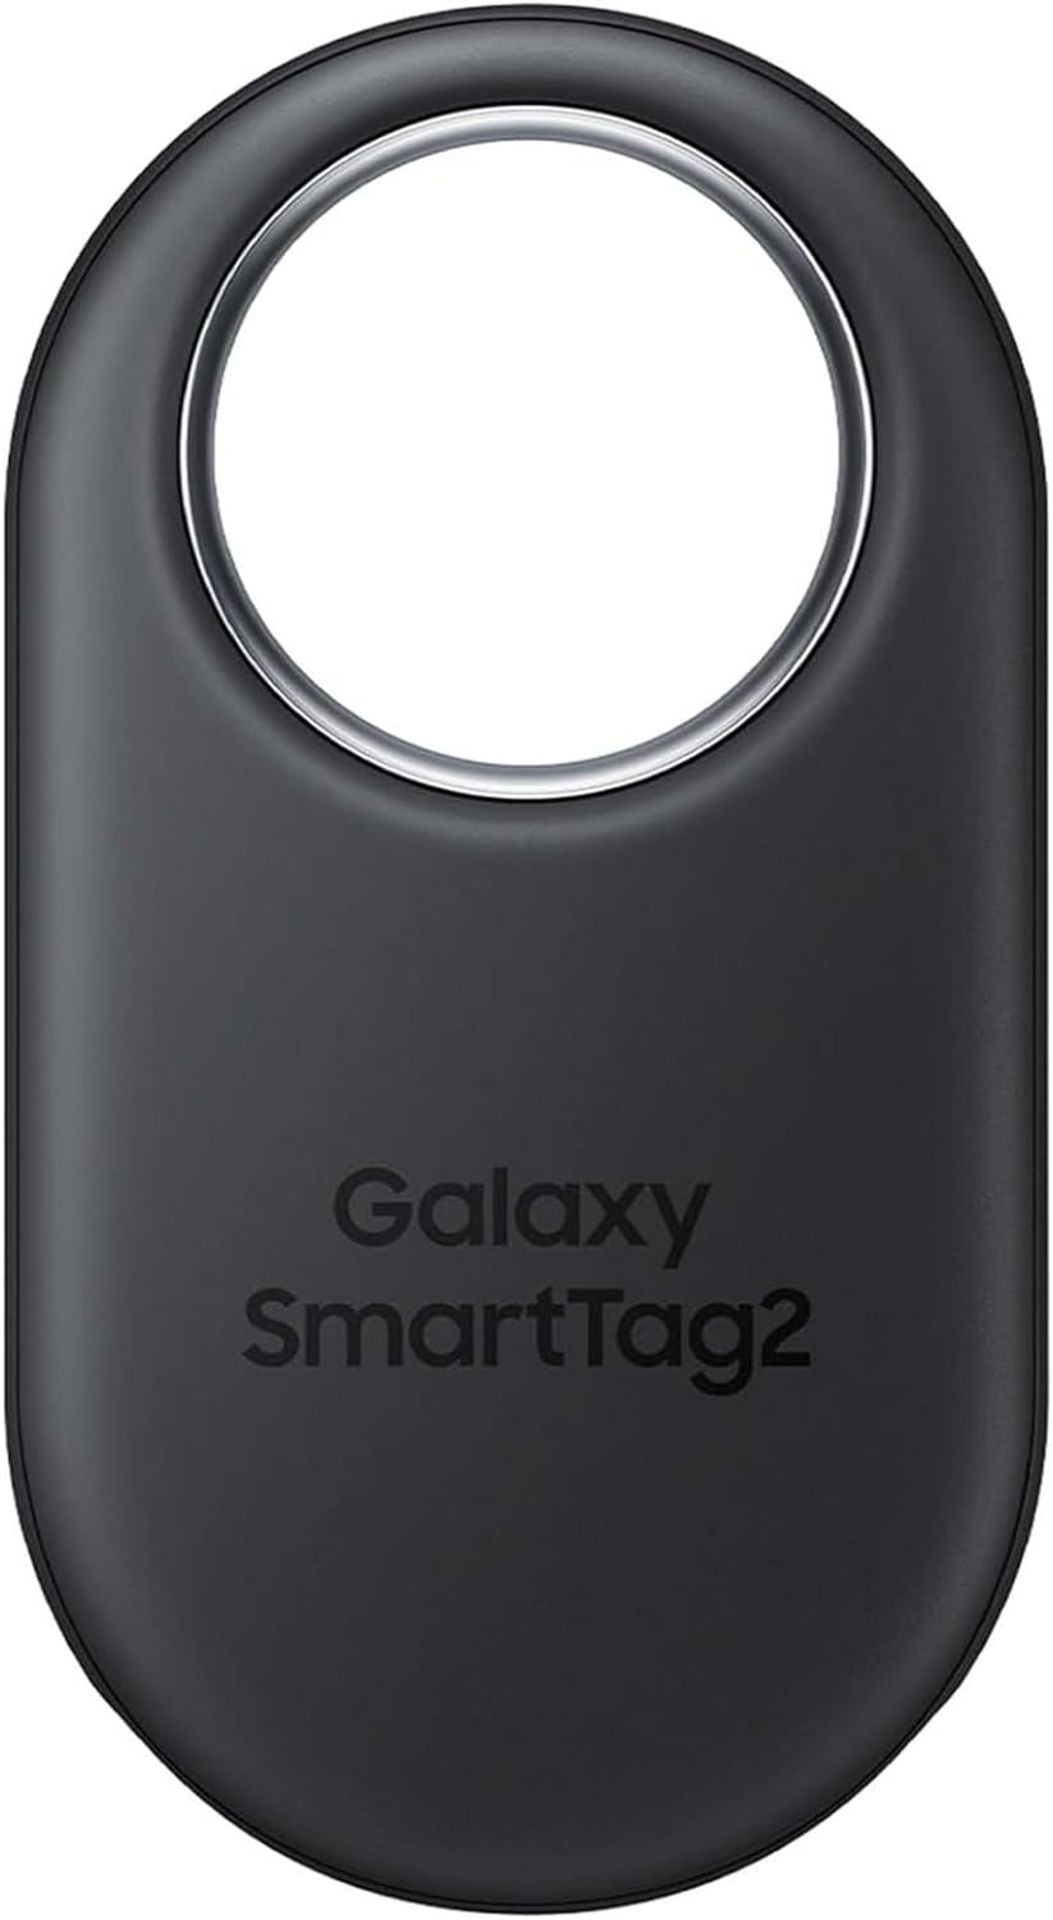 Samsung Galaxy SmartTag2 Bluetooth Tracker (1 Pack), Compass View AR, Find Lost Mode, Black